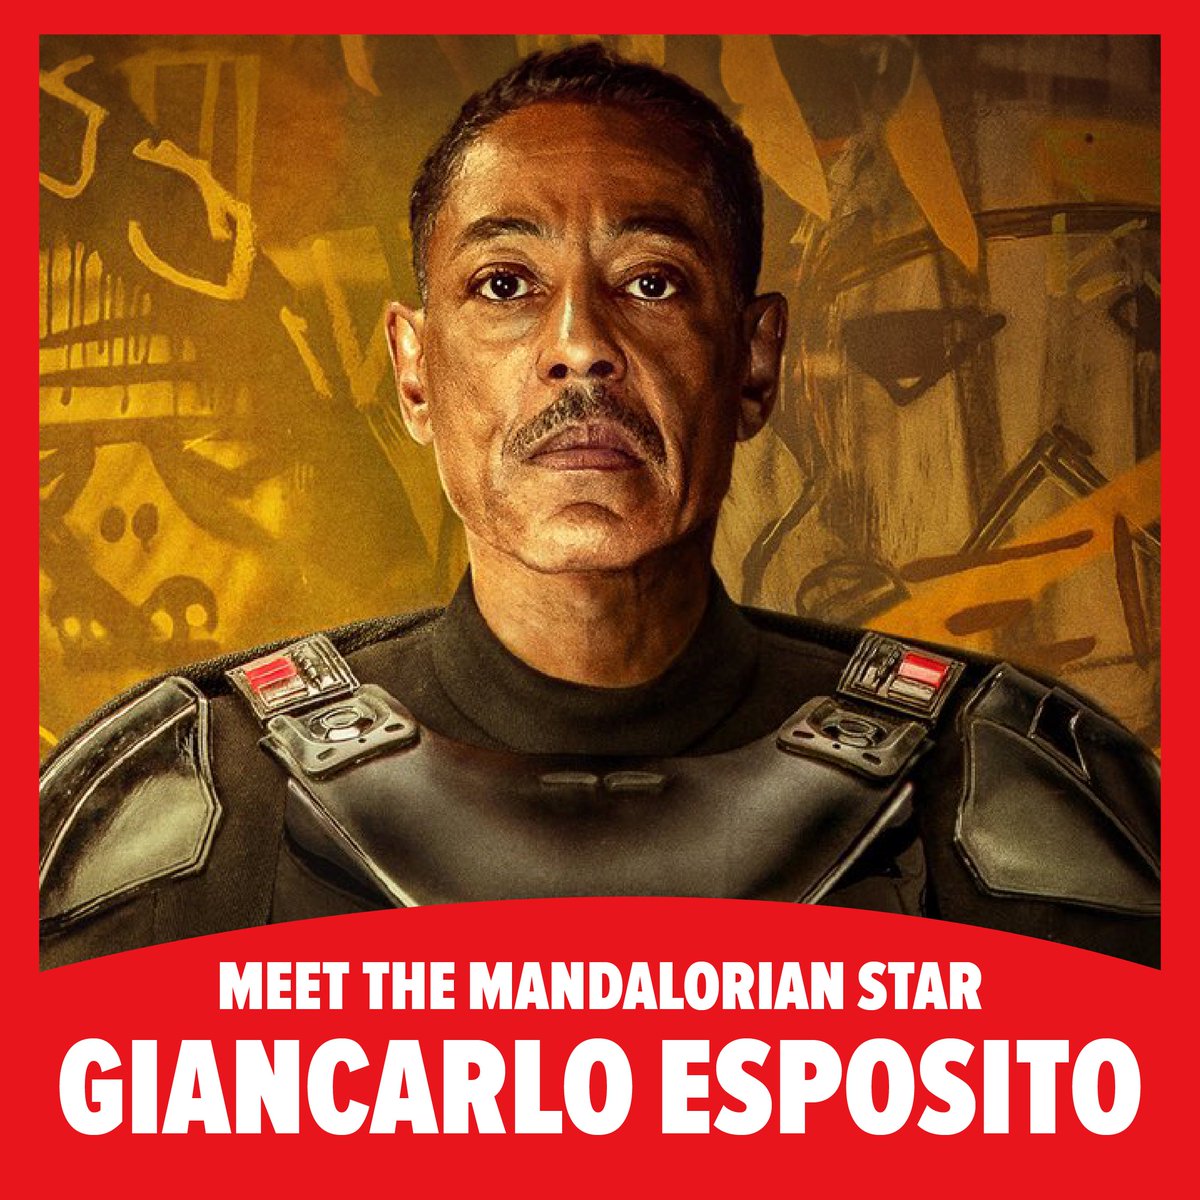 Beware, he knows everything about everyone. Giancarlo Esposito (Moff Gideon) from The Mandalorian is taking command of FAN EXPO Canada this August. Tickets are on sale now. spr.ly/6016jy2vk